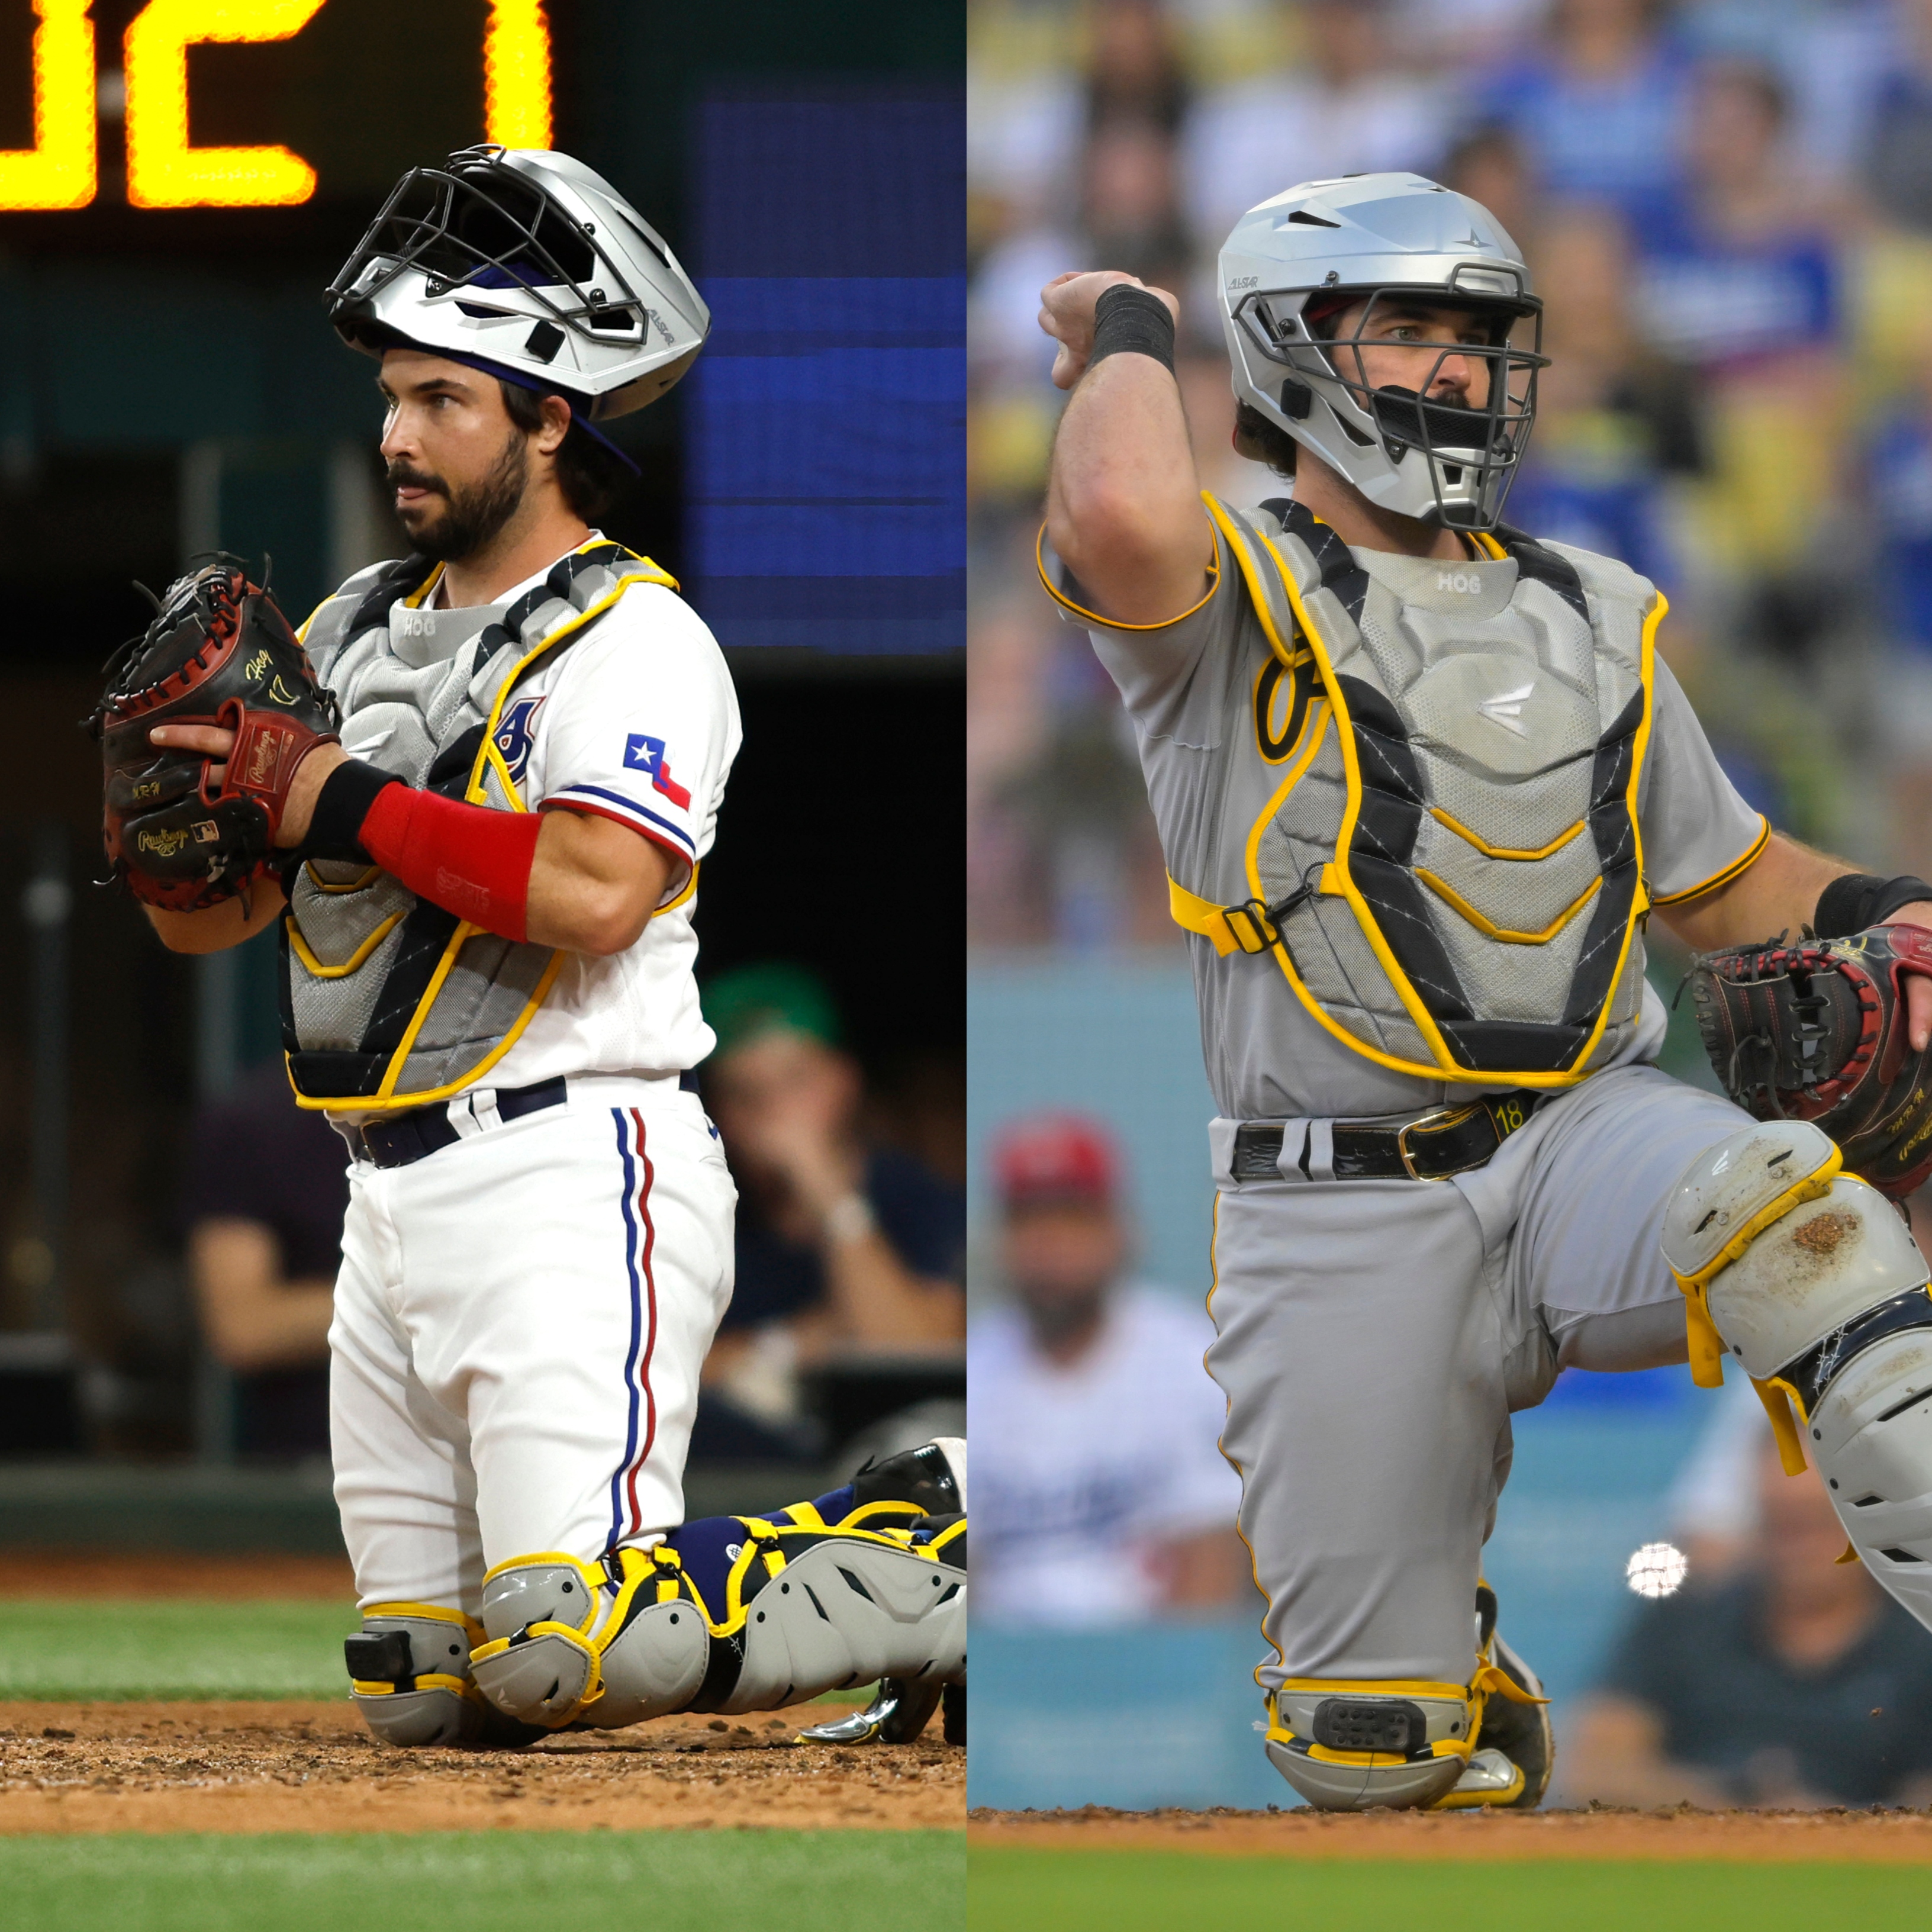 MLB Life on X: Austin Hedges wore his Pirates catchers gear in